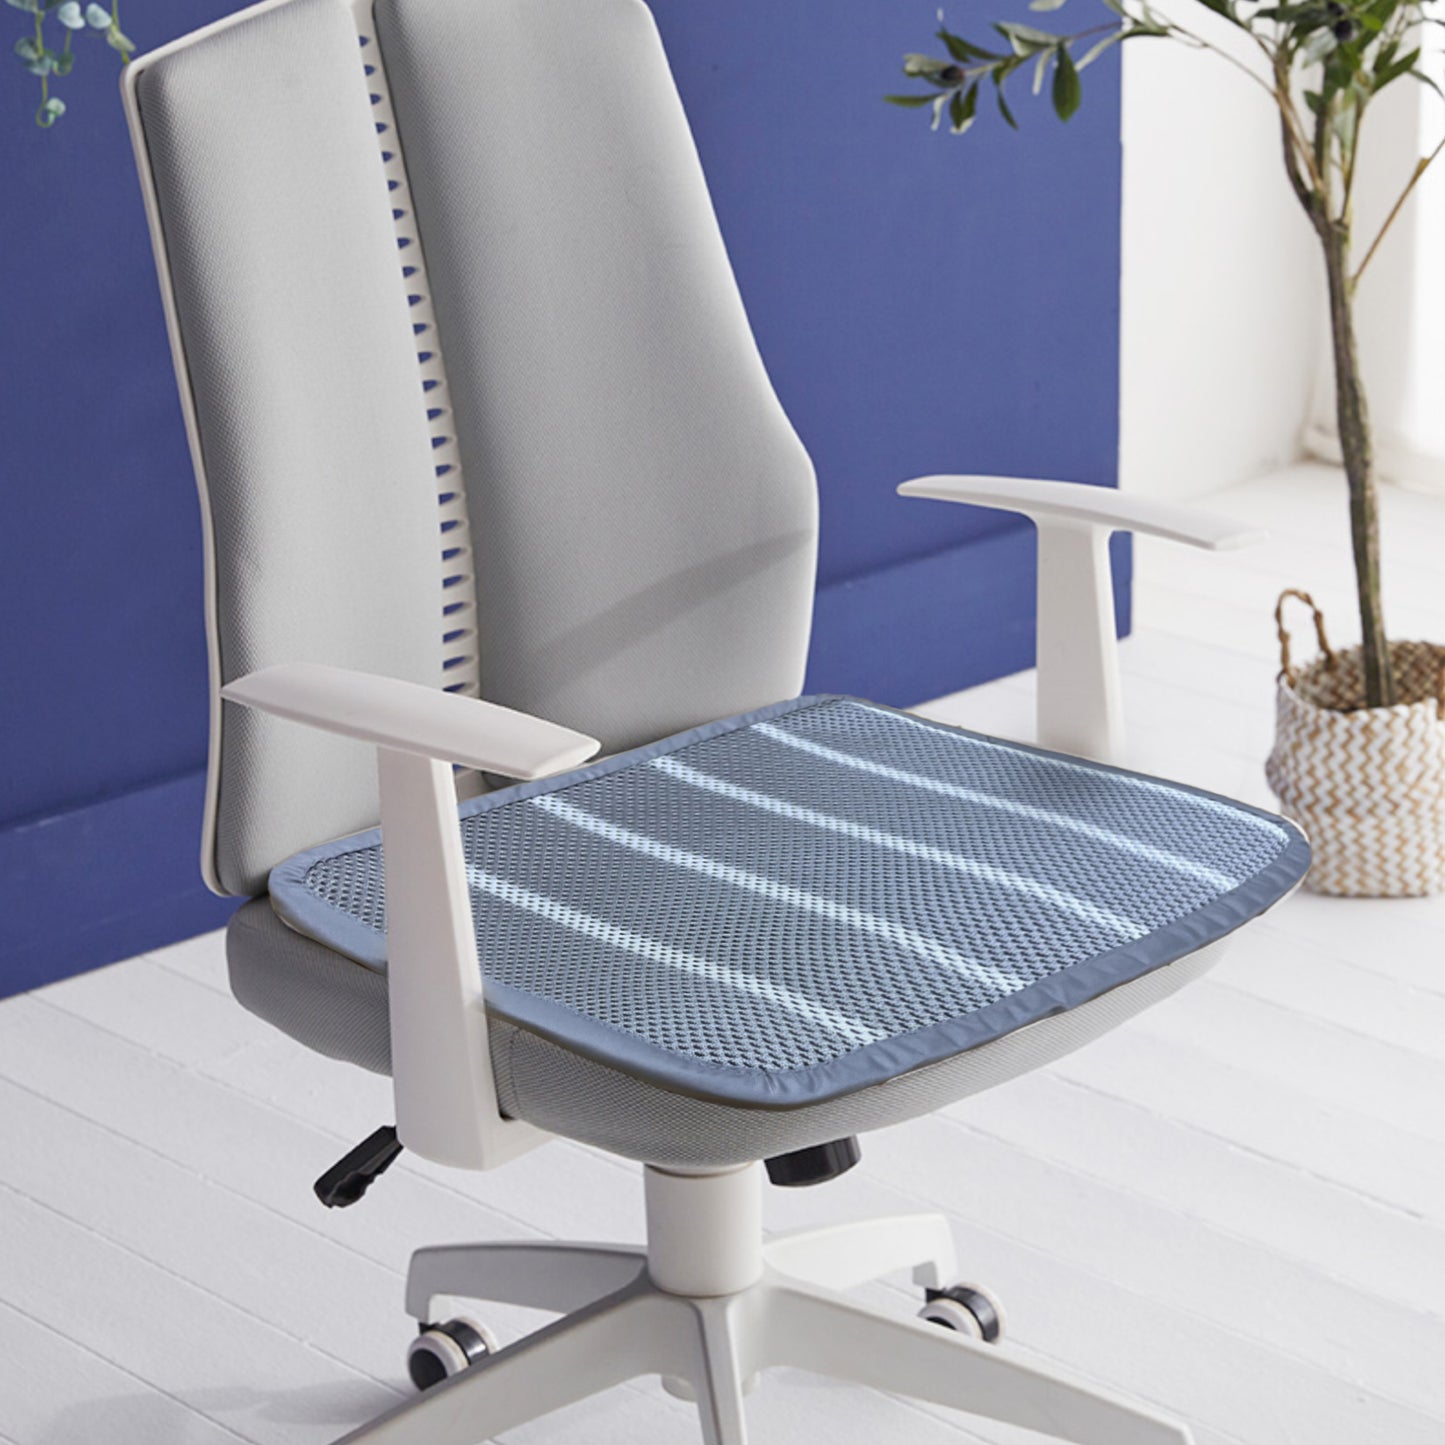 Indoor/Outdoor Chair Cushion With Ties